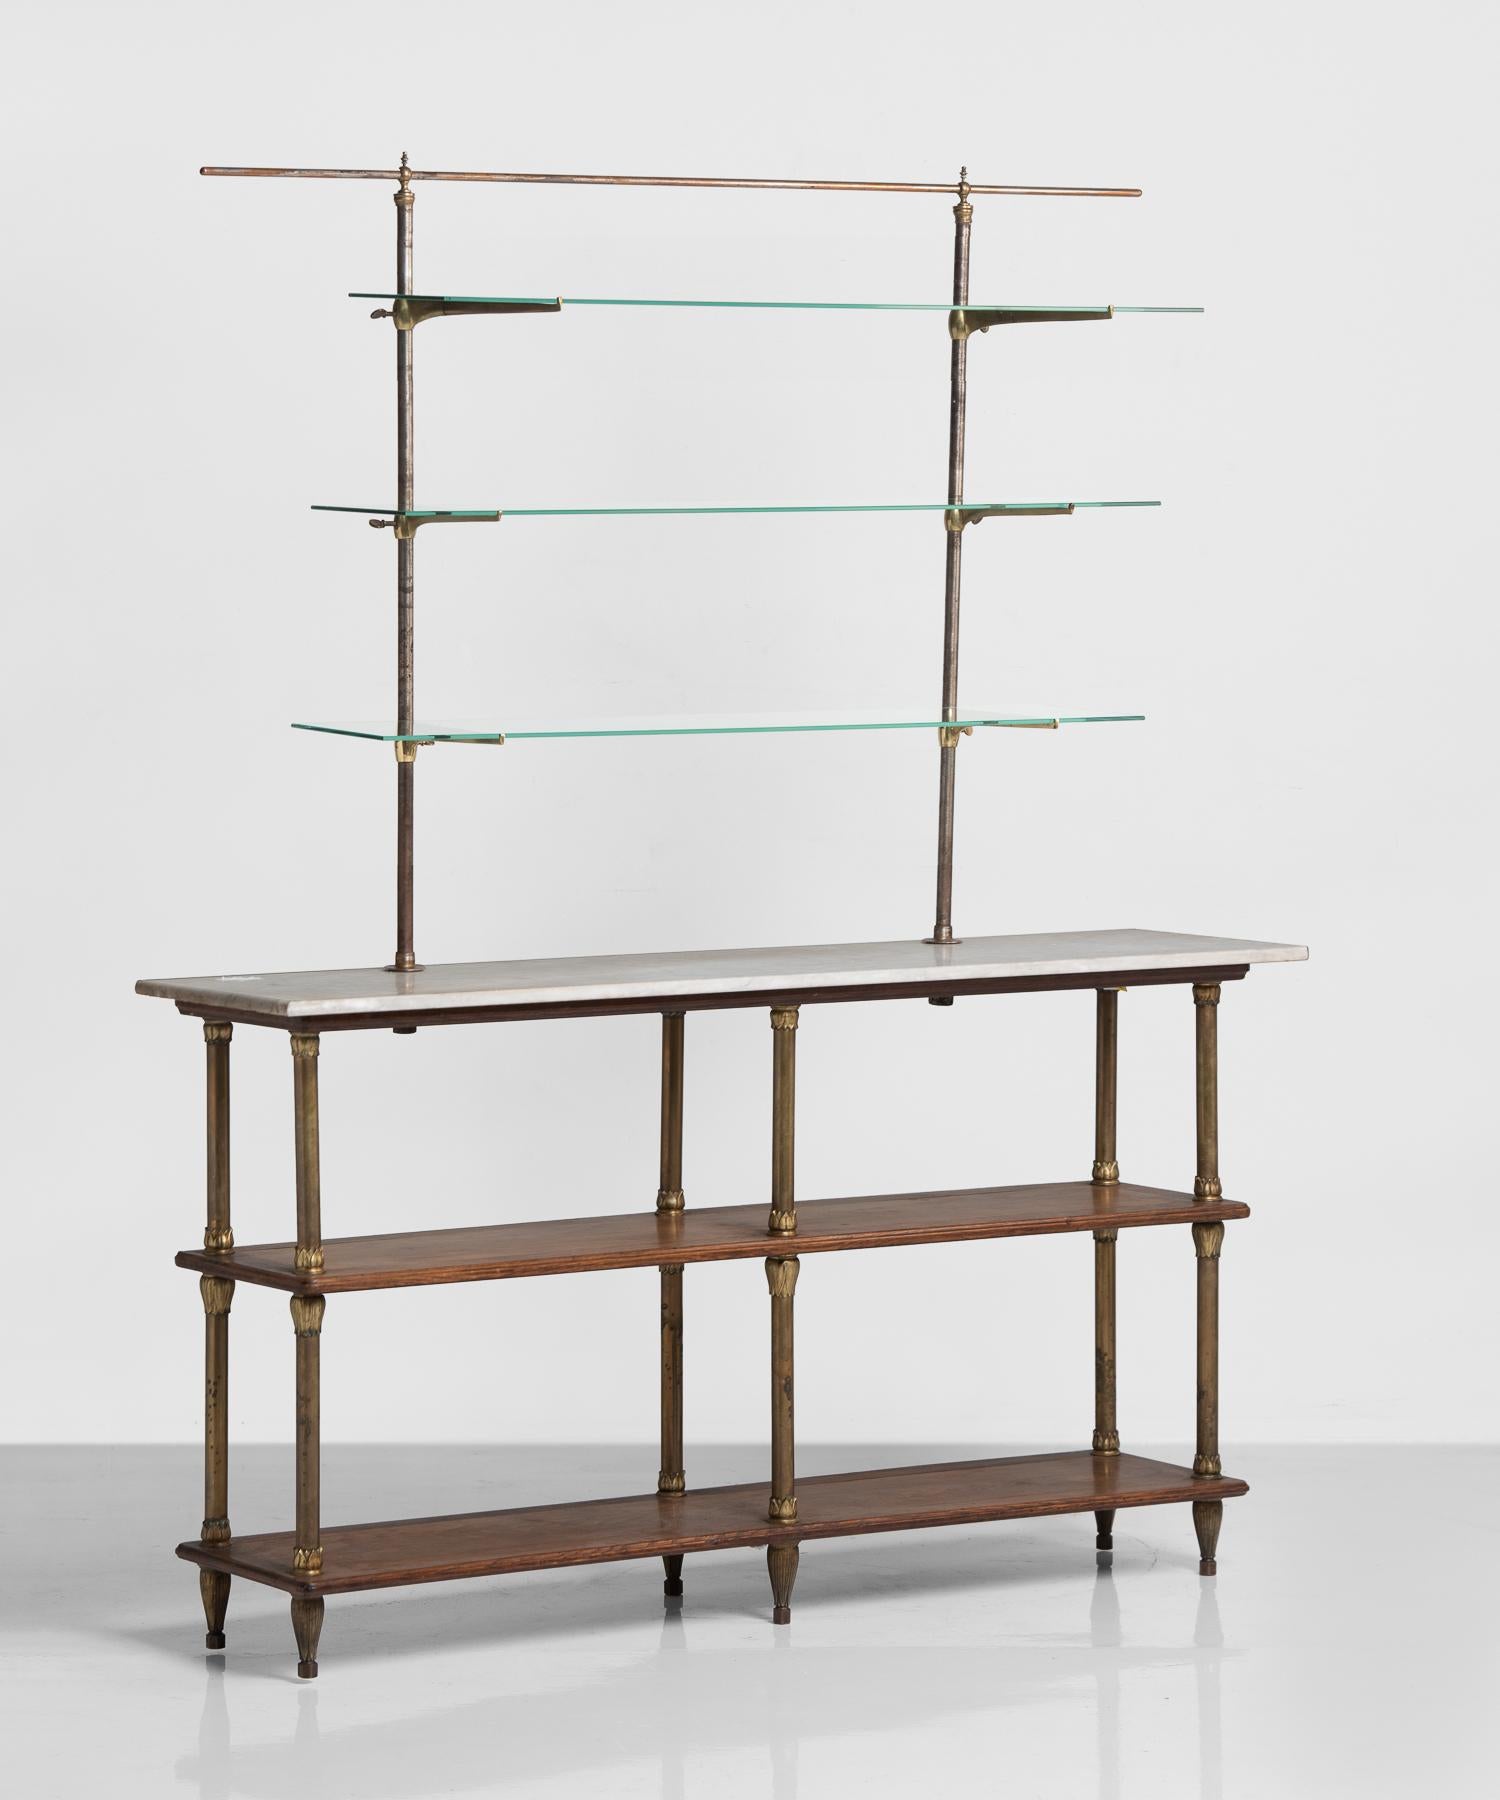 Brass and mahogany display shelving, England, circa 1920

Includes a marble top and brass, wood and glass elements allowing for a variety of display.